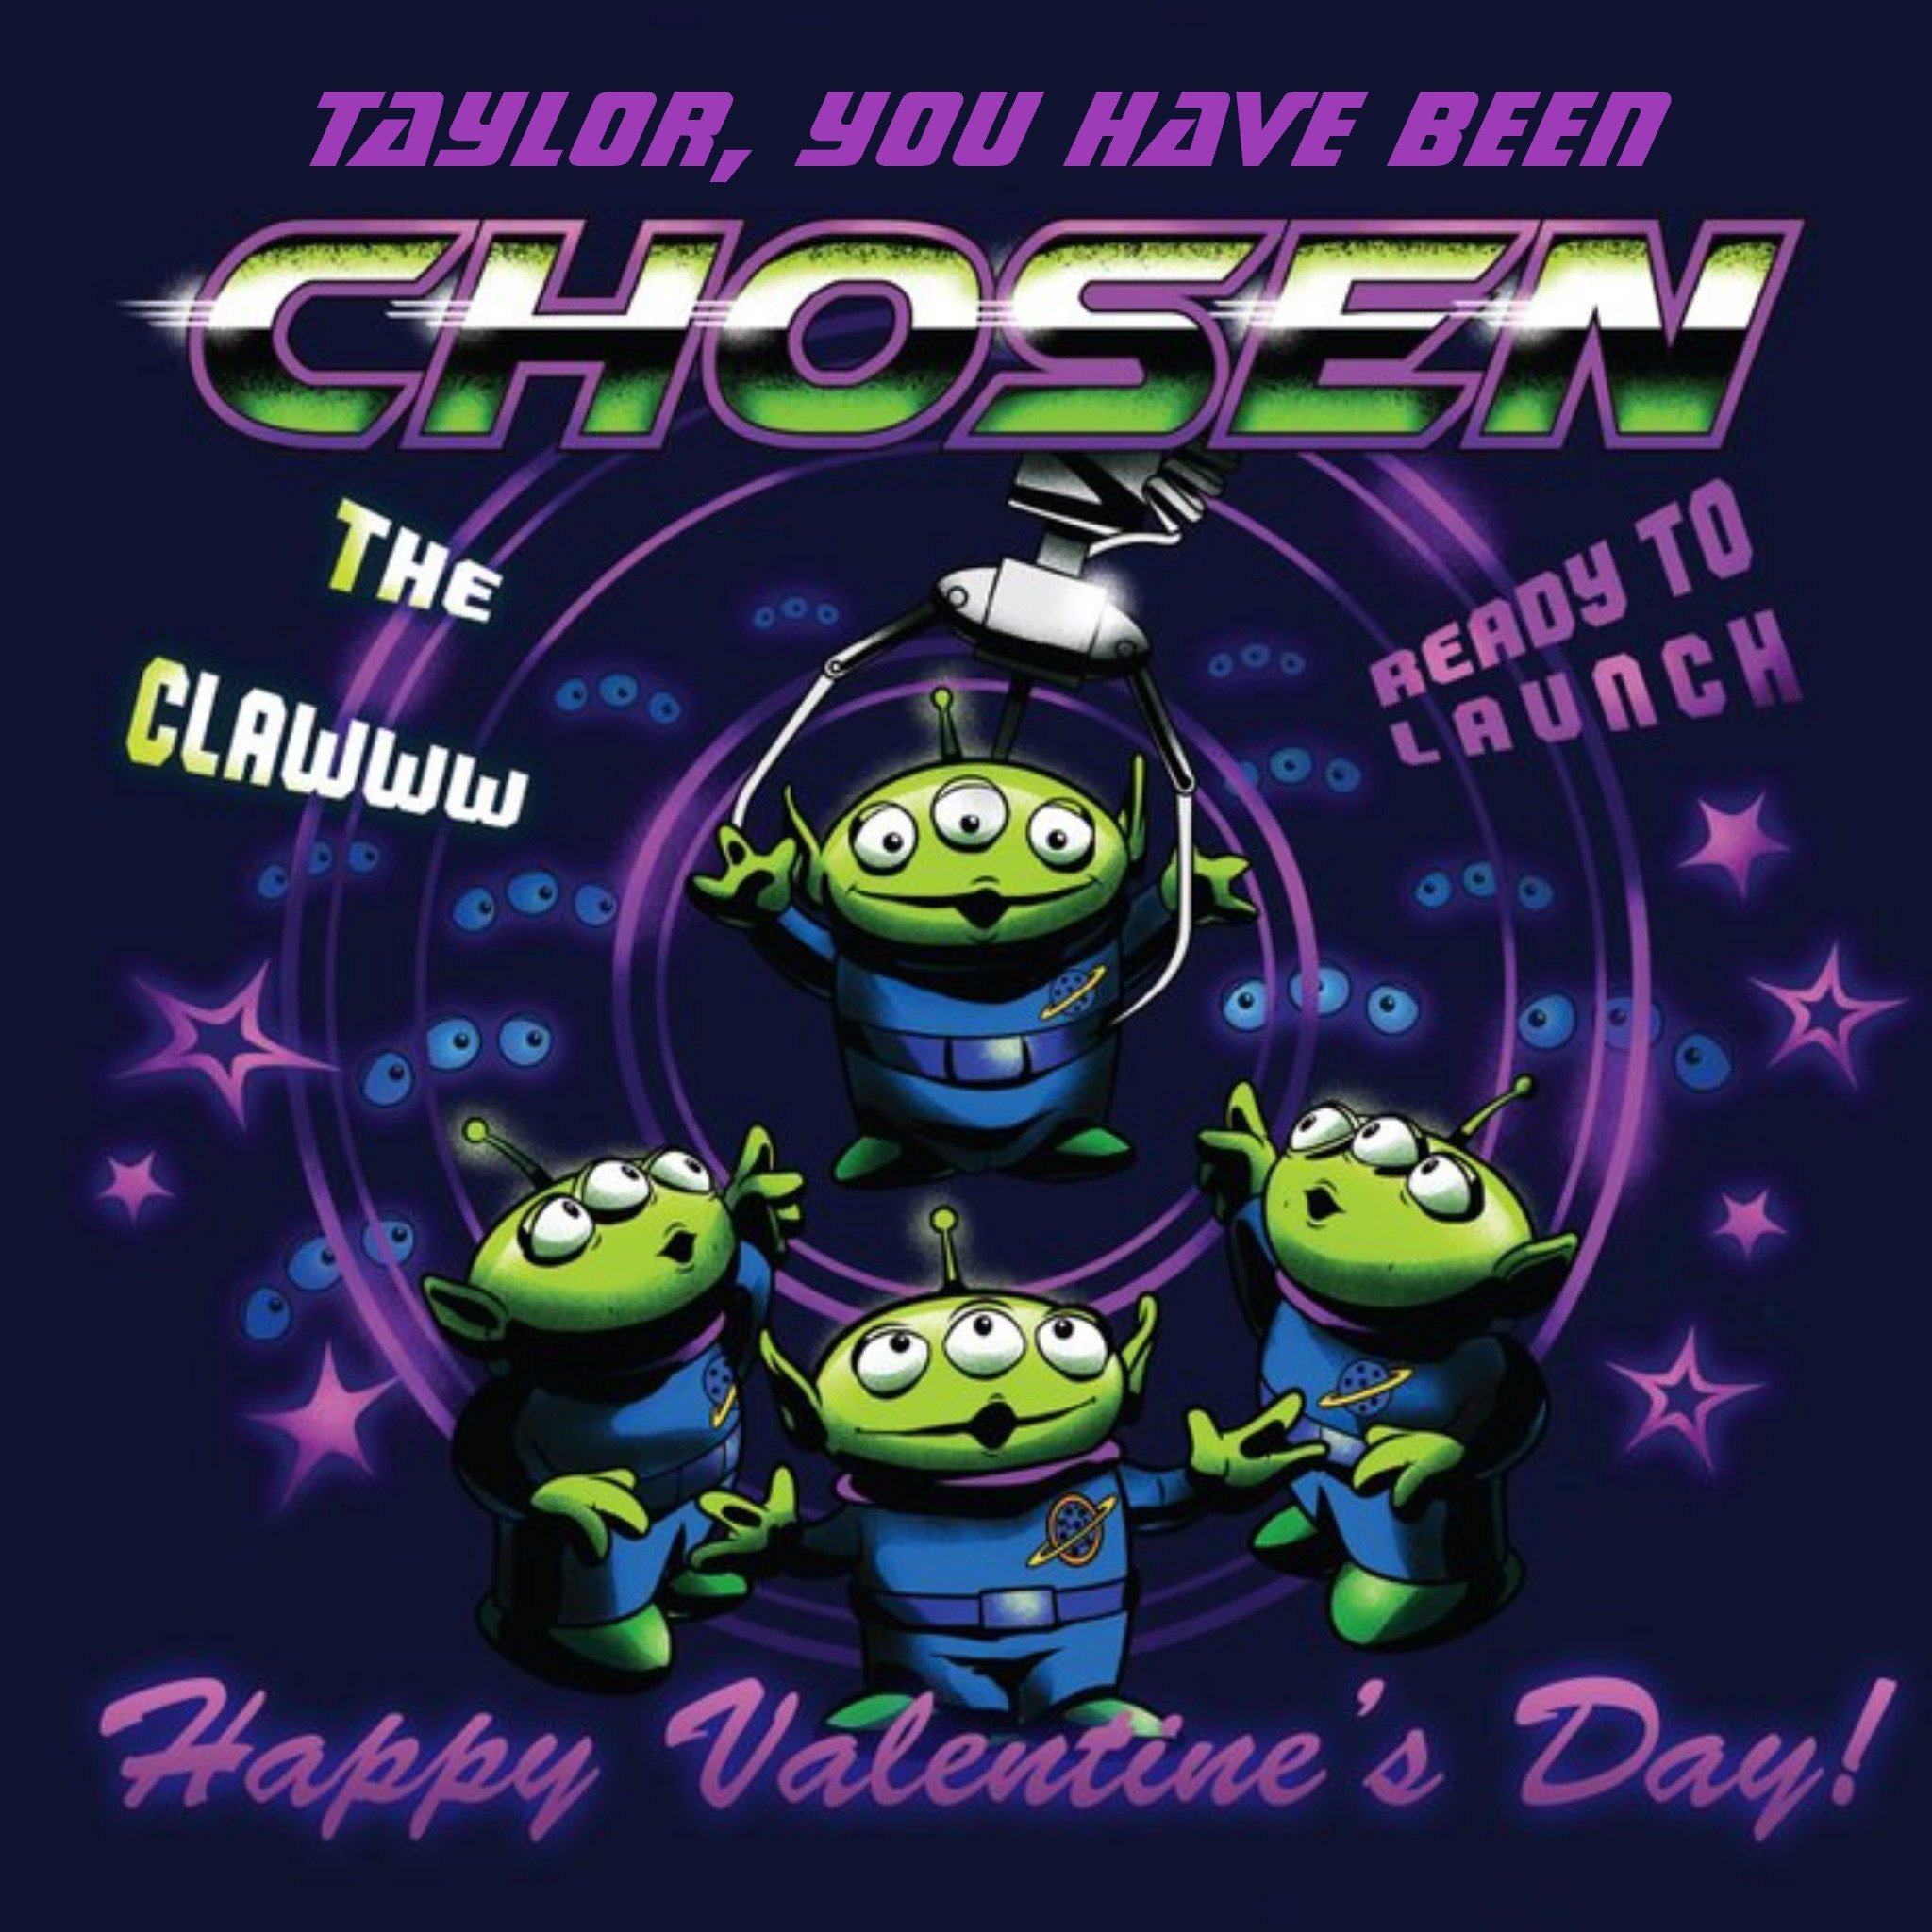 Toy Story Personalised You've Been Chosen Valentine's Day Card, Square